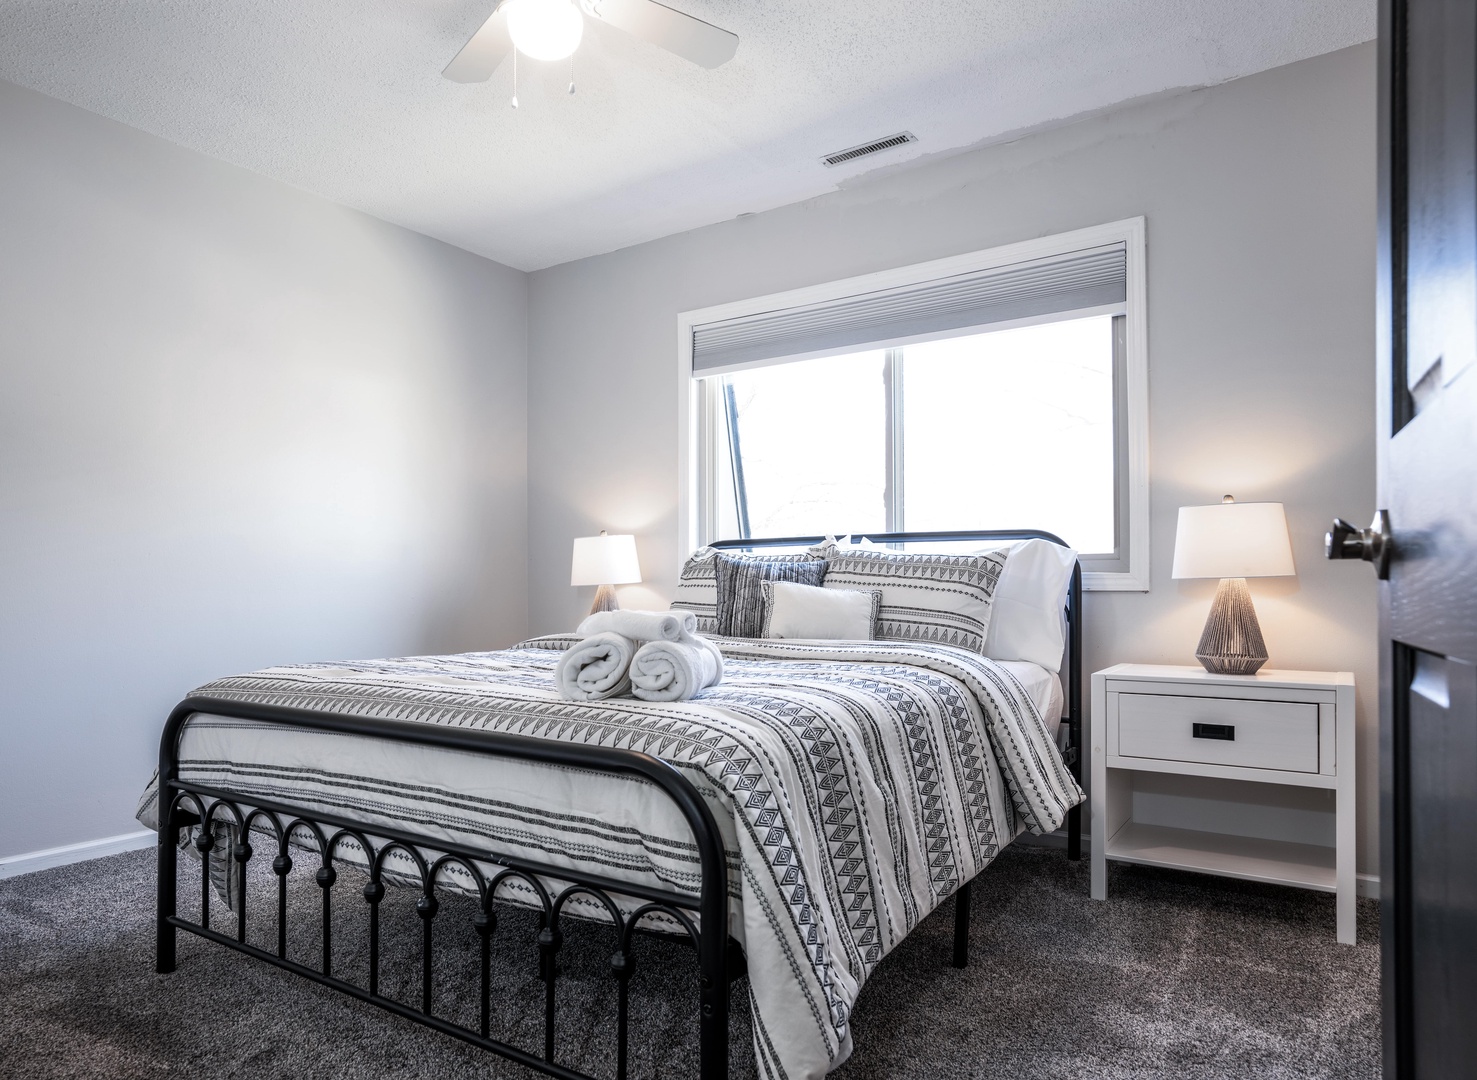 The second bedroom retreat showcases a cozy queen-sized bed & Smart TV